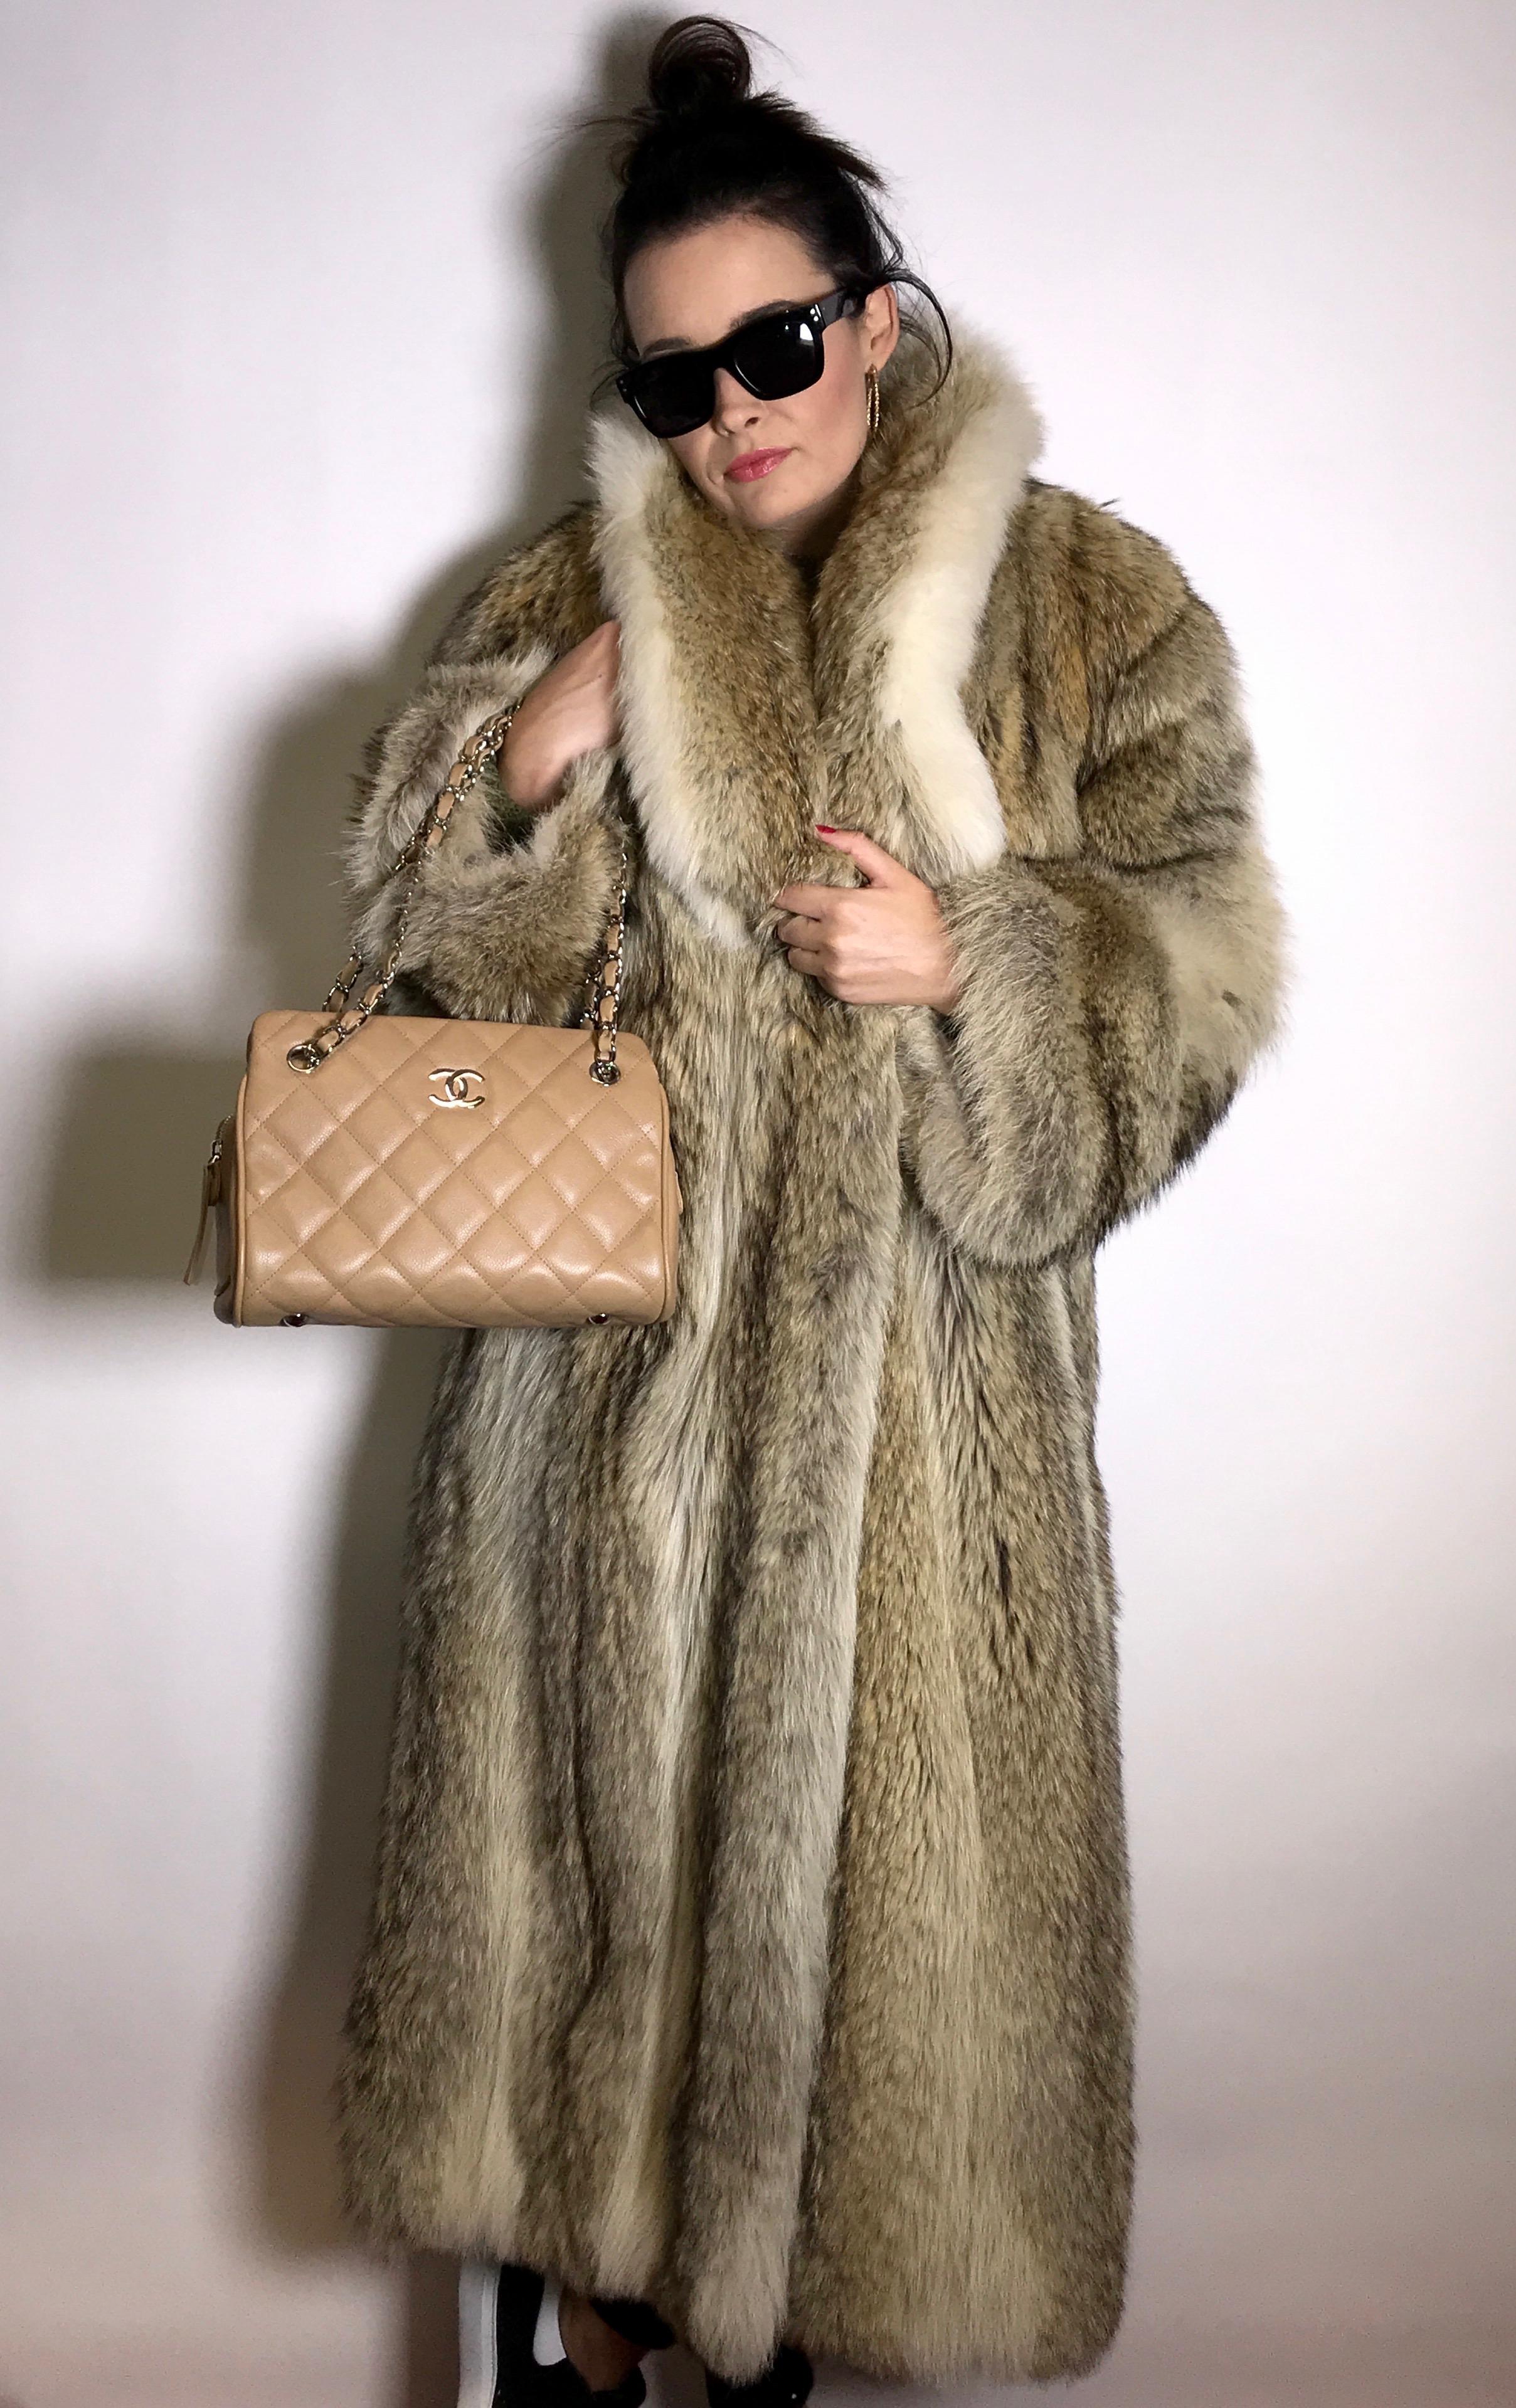 Beautiful long coyote/shadow fox fur coat.
Exclusive single piece made by the furrier.


Size EU: 38 - 40 / M
Total length: 122 cm
Shoulder width: 43 cm
Sleeve length: 52 cm

The coat is in excellent condition, almost never worn.

- Our model wears